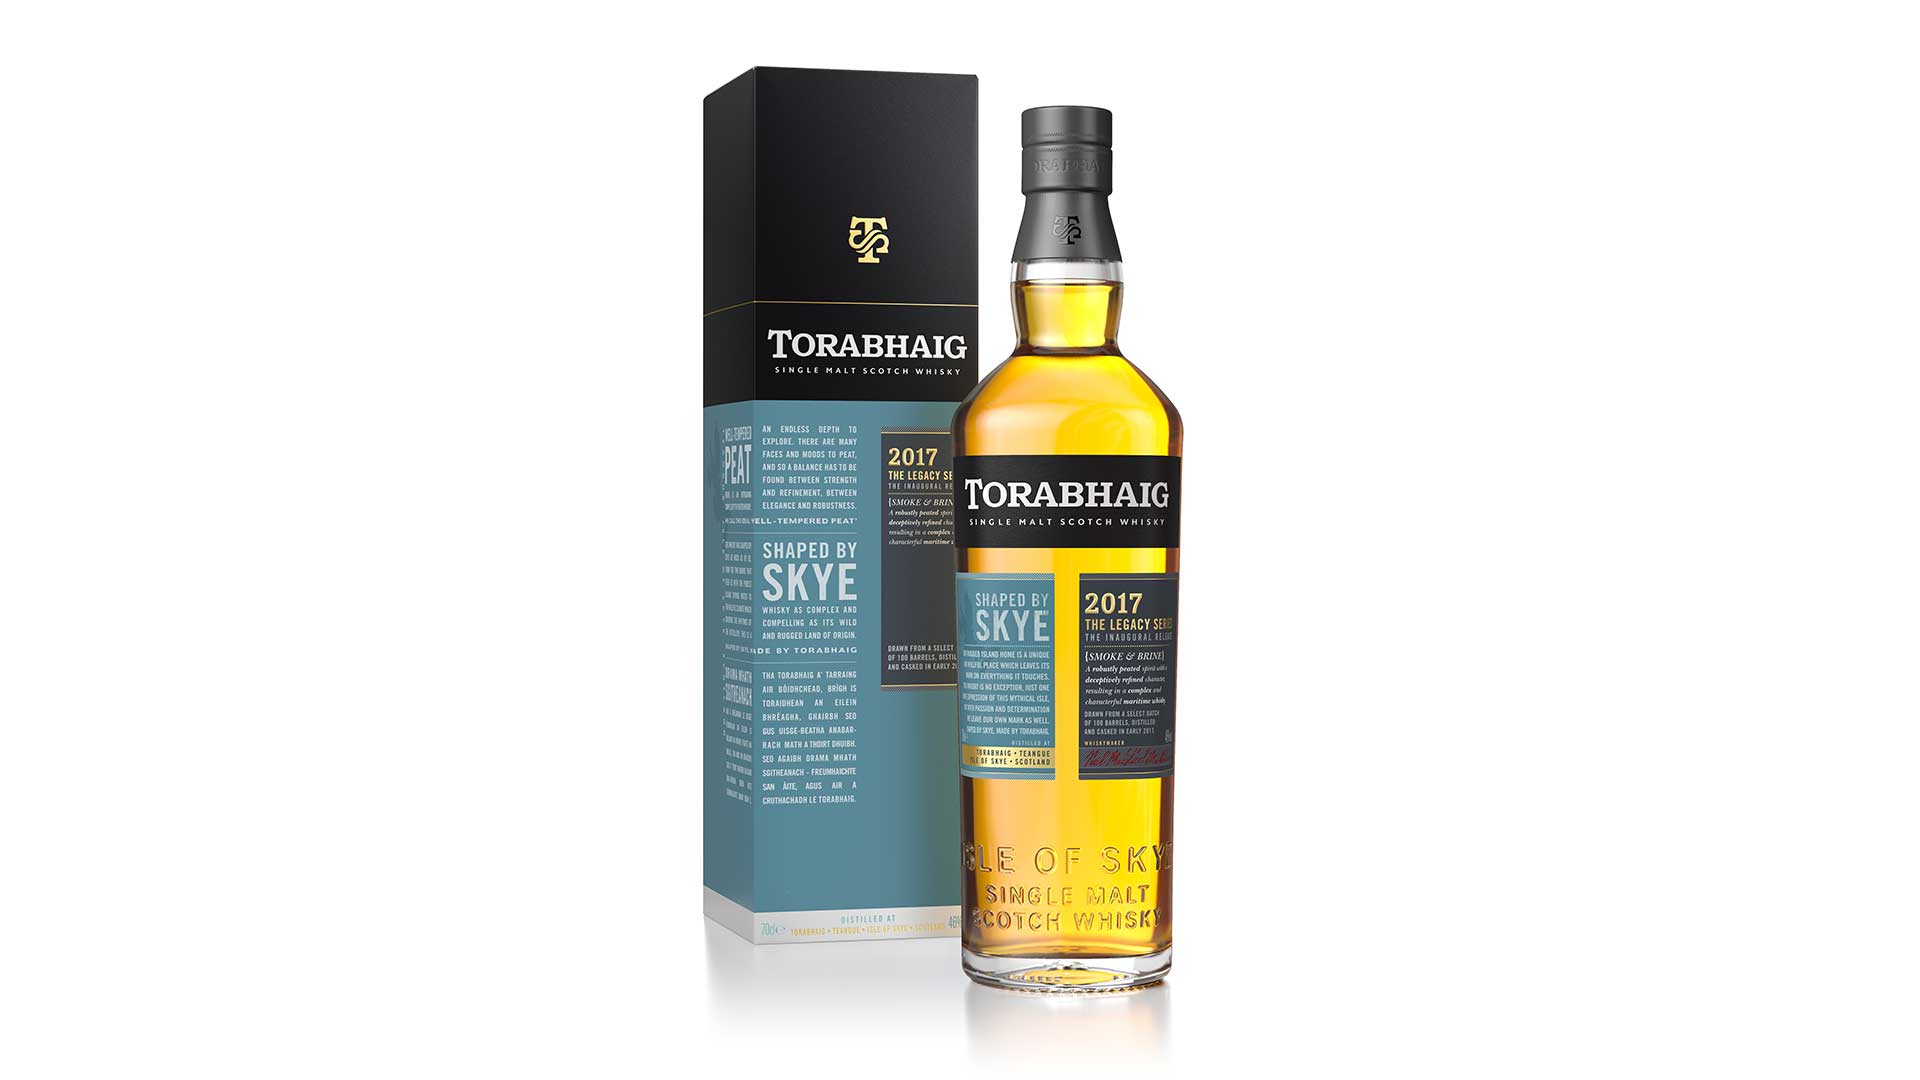 Torabhaig-Legacy-2017-Limited-Edition-Whisky-Coqtail-Milano